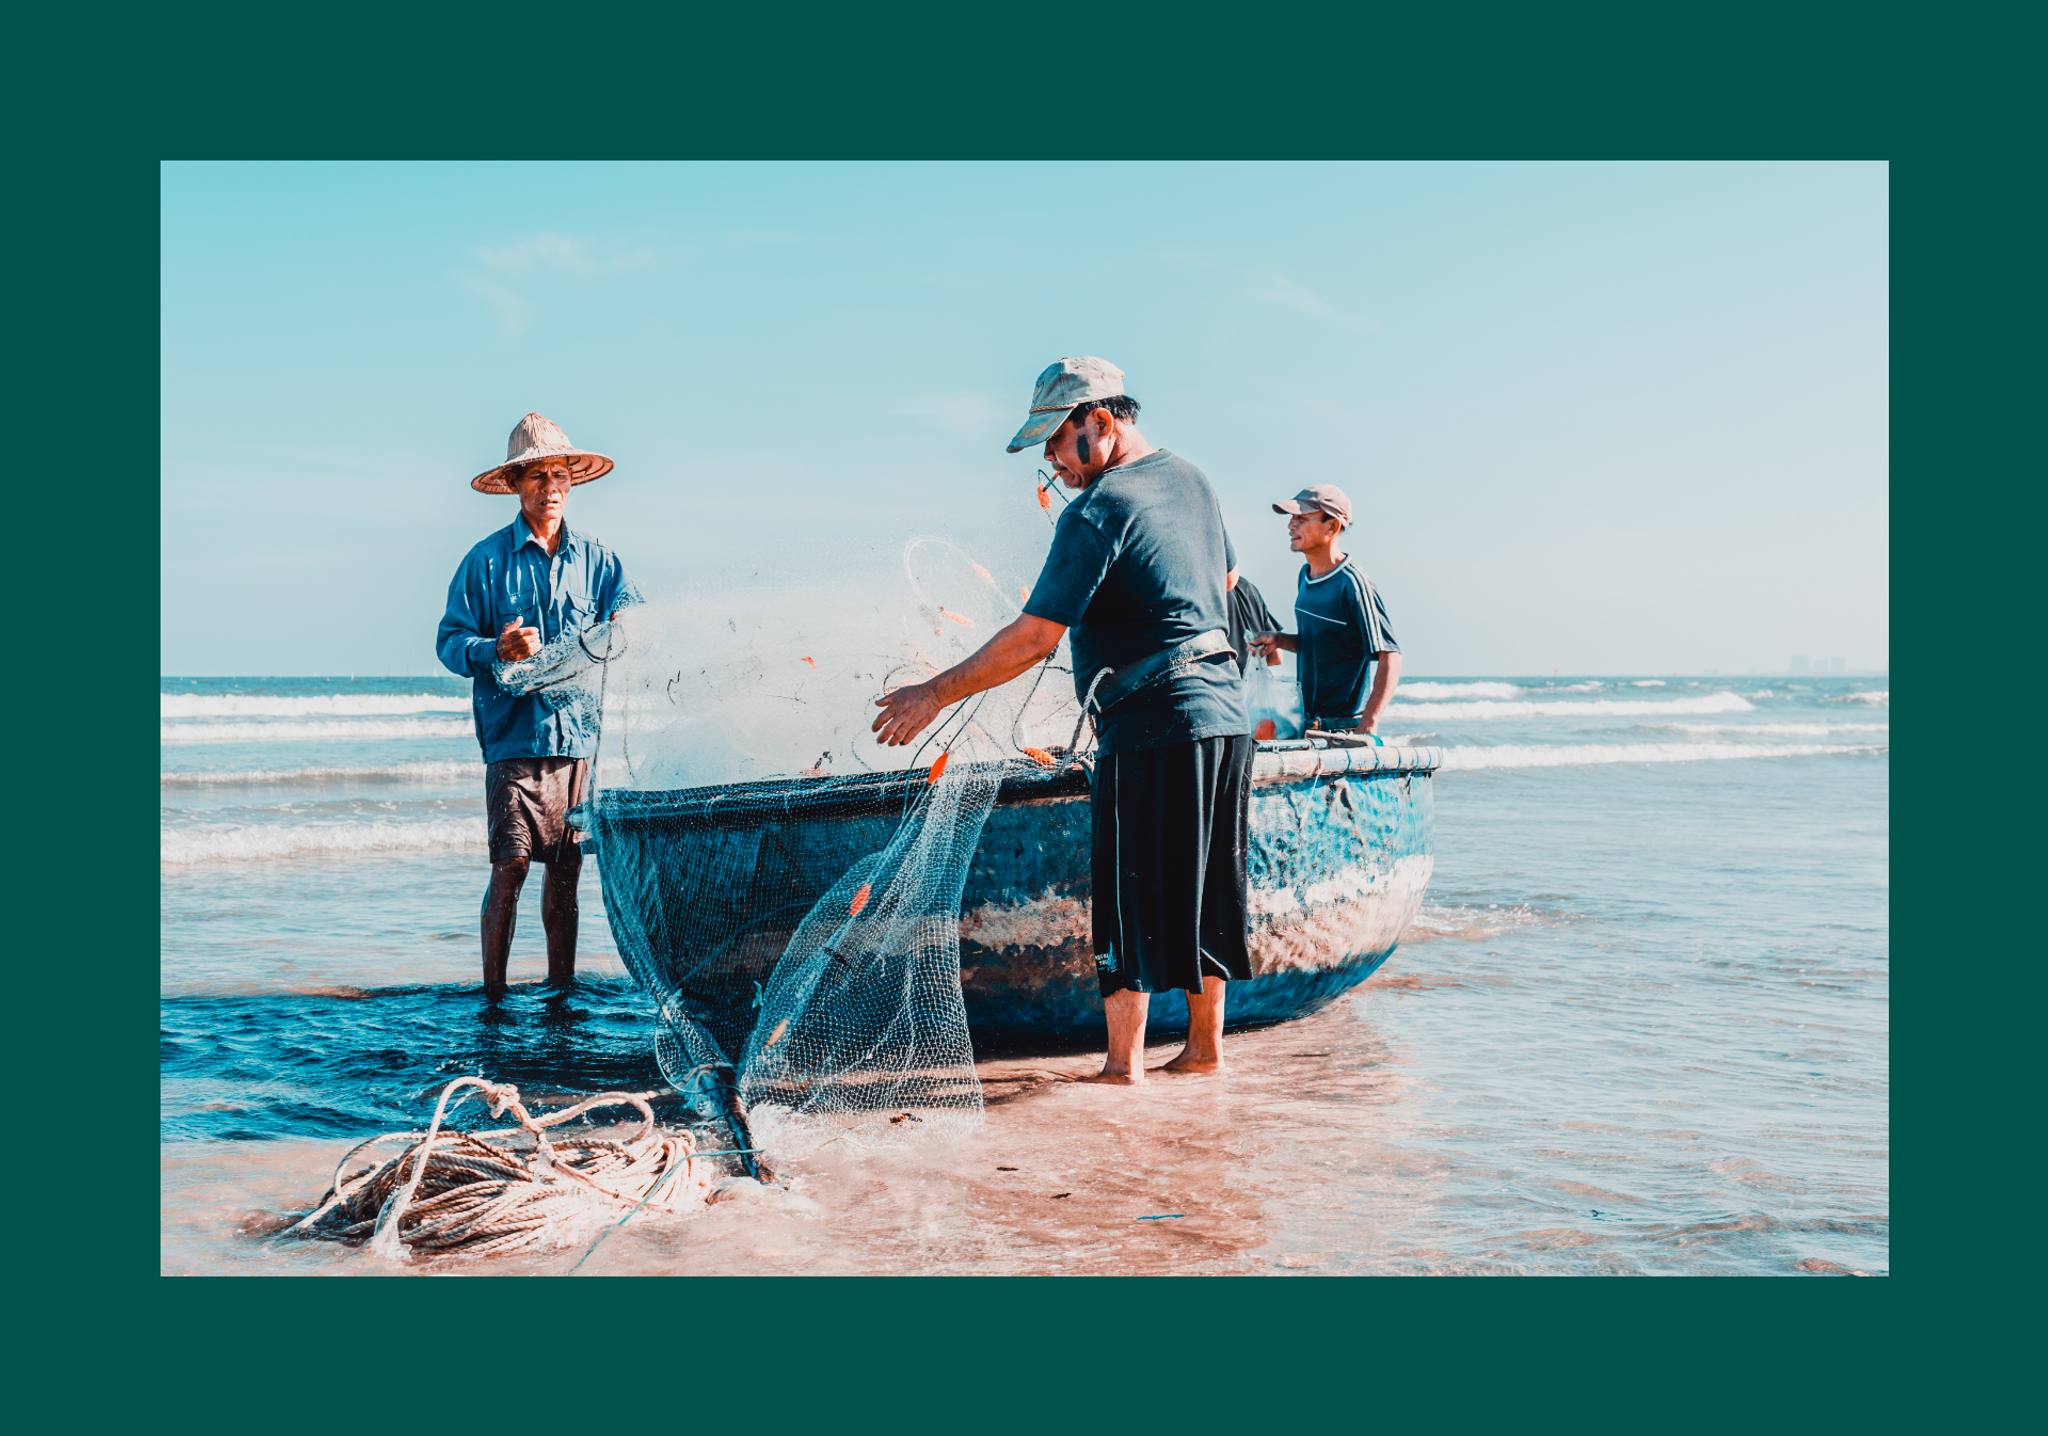 Three men stand around a small boat on beach, with a fishing net